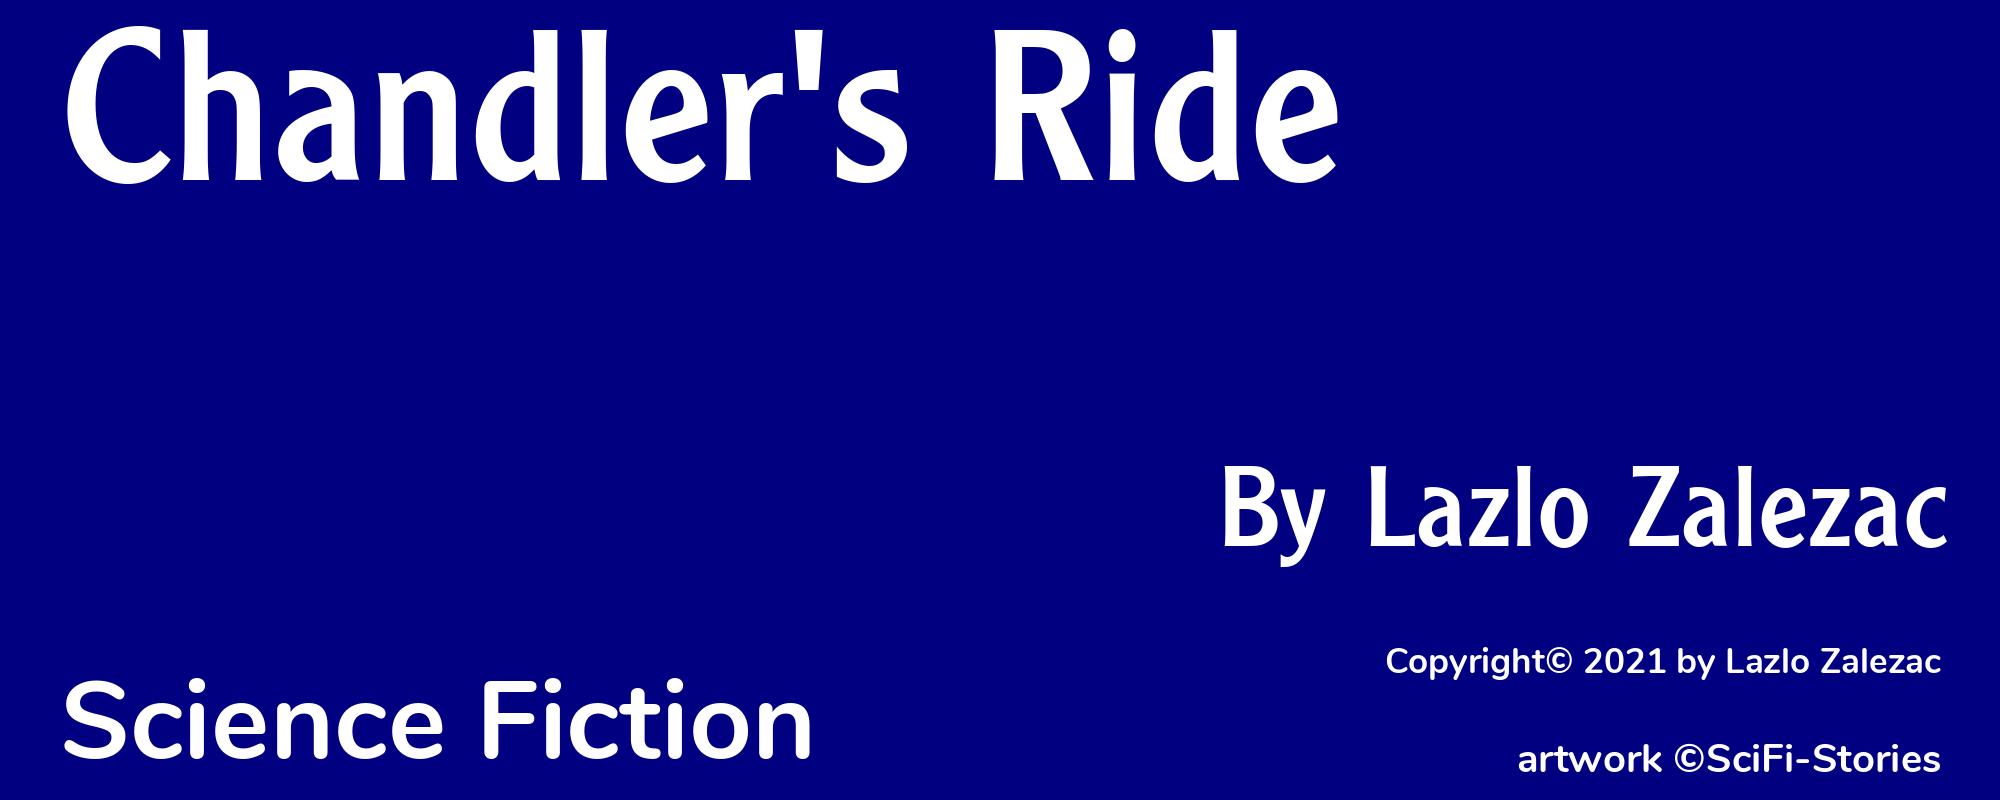 Chandler's Ride - Cover